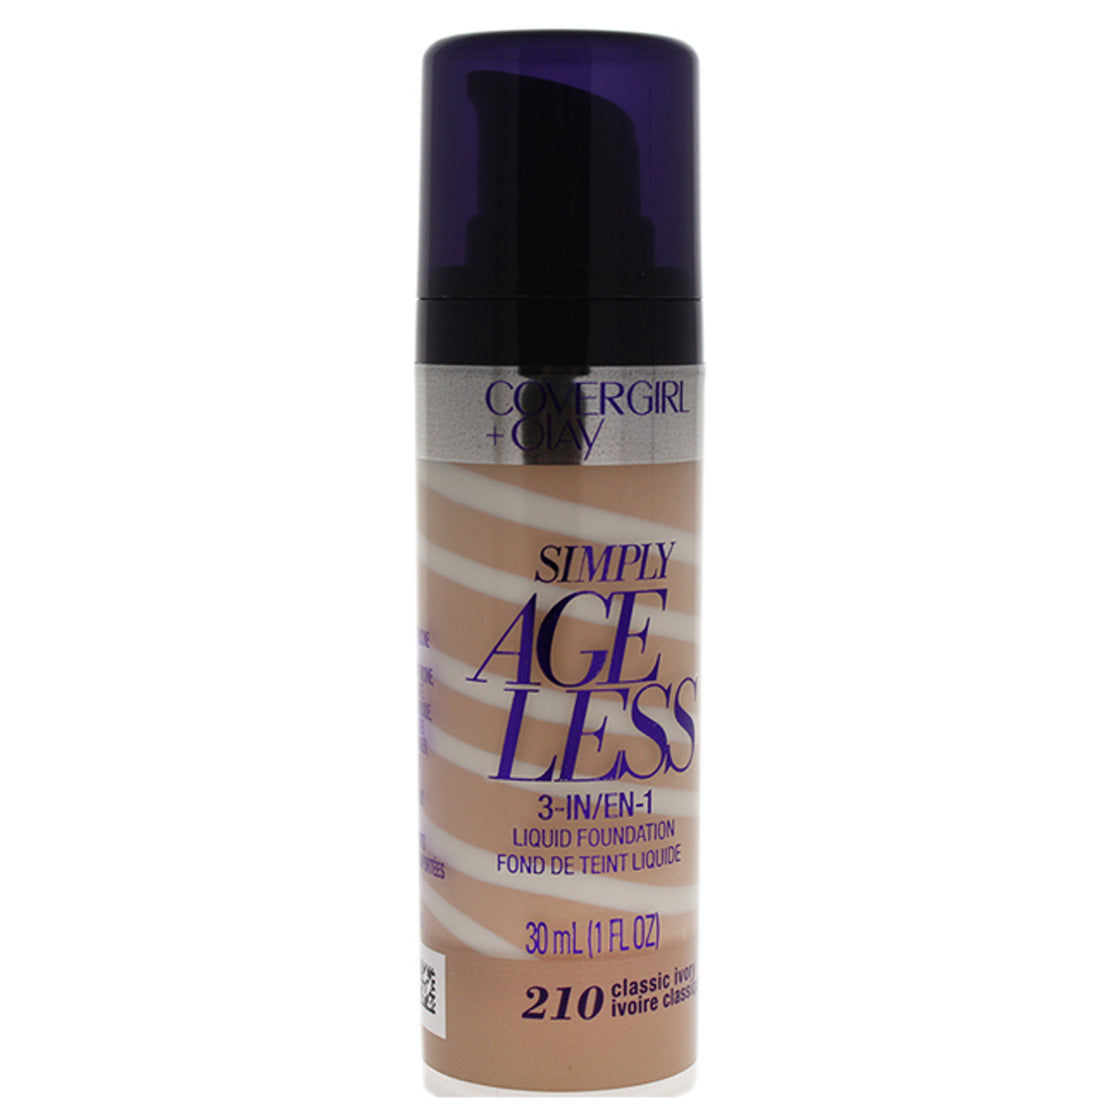 CoverGirl + Olay Simply Ageless3-in-1 Liquid Foundation - # 210 Classic Ivory by CoverGirl for Women - 1 oz Foundation